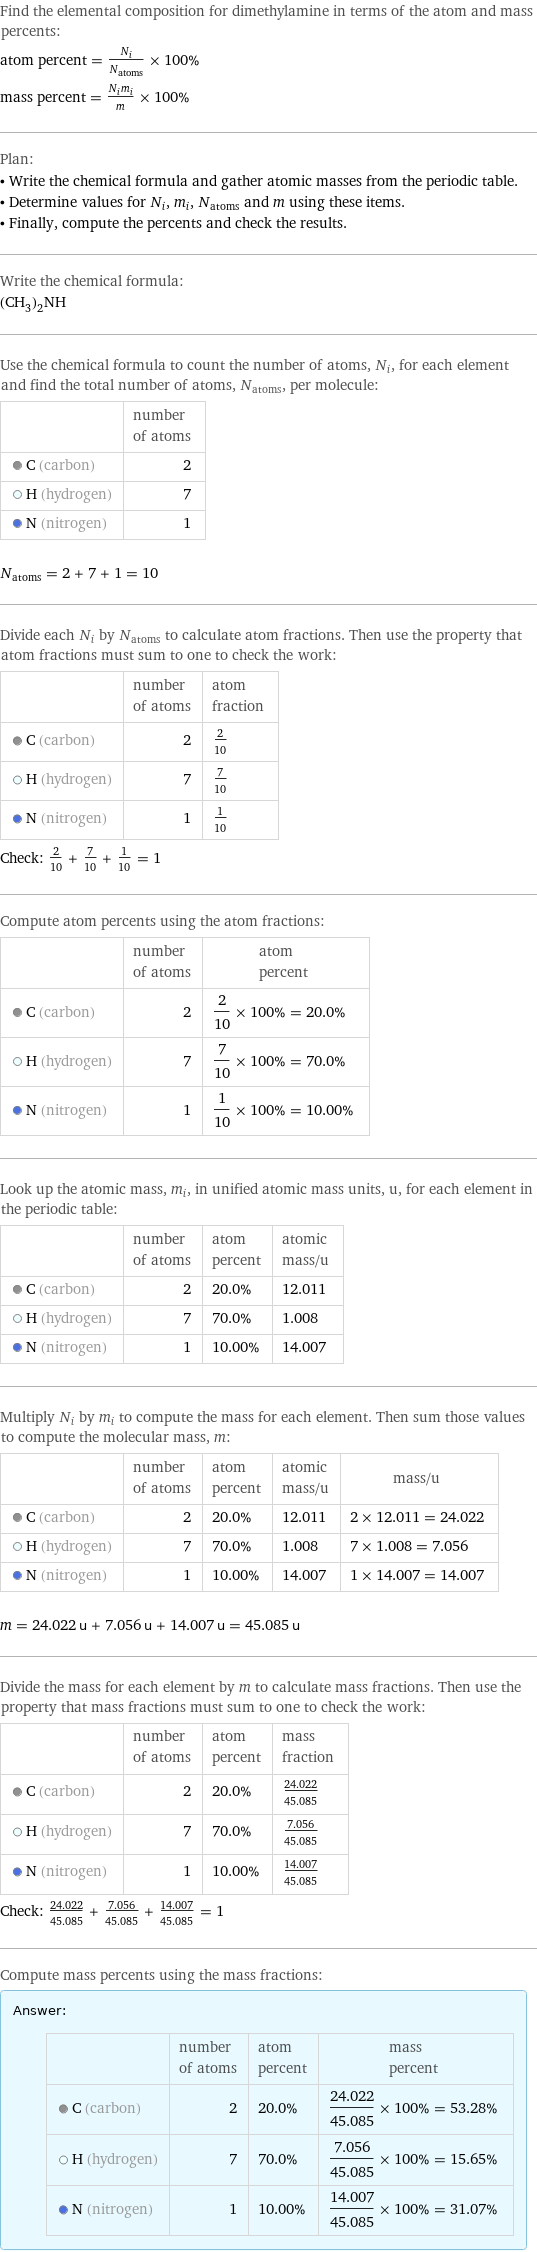 Find the elemental composition for dimethylamine in terms of the atom and mass percents: atom percent = N_i/N_atoms × 100% mass percent = (N_im_i)/m × 100% Plan: • Write the chemical formula and gather atomic masses from the periodic table. • Determine values for N_i, m_i, N_atoms and m using these items. • Finally, compute the percents and check the results. Write the chemical formula: (CH_3)_2NH Use the chemical formula to count the number of atoms, N_i, for each element and find the total number of atoms, N_atoms, per molecule:  | number of atoms  C (carbon) | 2  H (hydrogen) | 7  N (nitrogen) | 1  N_atoms = 2 + 7 + 1 = 10 Divide each N_i by N_atoms to calculate atom fractions. Then use the property that atom fractions must sum to one to check the work:  | number of atoms | atom fraction  C (carbon) | 2 | 2/10  H (hydrogen) | 7 | 7/10  N (nitrogen) | 1 | 1/10 Check: 2/10 + 7/10 + 1/10 = 1 Compute atom percents using the atom fractions:  | number of atoms | atom percent  C (carbon) | 2 | 2/10 × 100% = 20.0%  H (hydrogen) | 7 | 7/10 × 100% = 70.0%  N (nitrogen) | 1 | 1/10 × 100% = 10.00% Look up the atomic mass, m_i, in unified atomic mass units, u, for each element in the periodic table:  | number of atoms | atom percent | atomic mass/u  C (carbon) | 2 | 20.0% | 12.011  H (hydrogen) | 7 | 70.0% | 1.008  N (nitrogen) | 1 | 10.00% | 14.007 Multiply N_i by m_i to compute the mass for each element. Then sum those values to compute the molecular mass, m:  | number of atoms | atom percent | atomic mass/u | mass/u  C (carbon) | 2 | 20.0% | 12.011 | 2 × 12.011 = 24.022  H (hydrogen) | 7 | 70.0% | 1.008 | 7 × 1.008 = 7.056  N (nitrogen) | 1 | 10.00% | 14.007 | 1 × 14.007 = 14.007  m = 24.022 u + 7.056 u + 14.007 u = 45.085 u Divide the mass for each element by m to calculate mass fractions. Then use the property that mass fractions must sum to one to check the work:  | number of atoms | atom percent | mass fraction  C (carbon) | 2 | 20.0% | 24.022/45.085  H (hydrogen) | 7 | 70.0% | 7.056/45.085  N (nitrogen) | 1 | 10.00% | 14.007/45.085 Check: 24.022/45.085 + 7.056/45.085 + 14.007/45.085 = 1 Compute mass percents using the mass fractions: Answer: |   | | number of atoms | atom percent | mass percent  C (carbon) | 2 | 20.0% | 24.022/45.085 × 100% = 53.28%  H (hydrogen) | 7 | 70.0% | 7.056/45.085 × 100% = 15.65%  N (nitrogen) | 1 | 10.00% | 14.007/45.085 × 100% = 31.07%